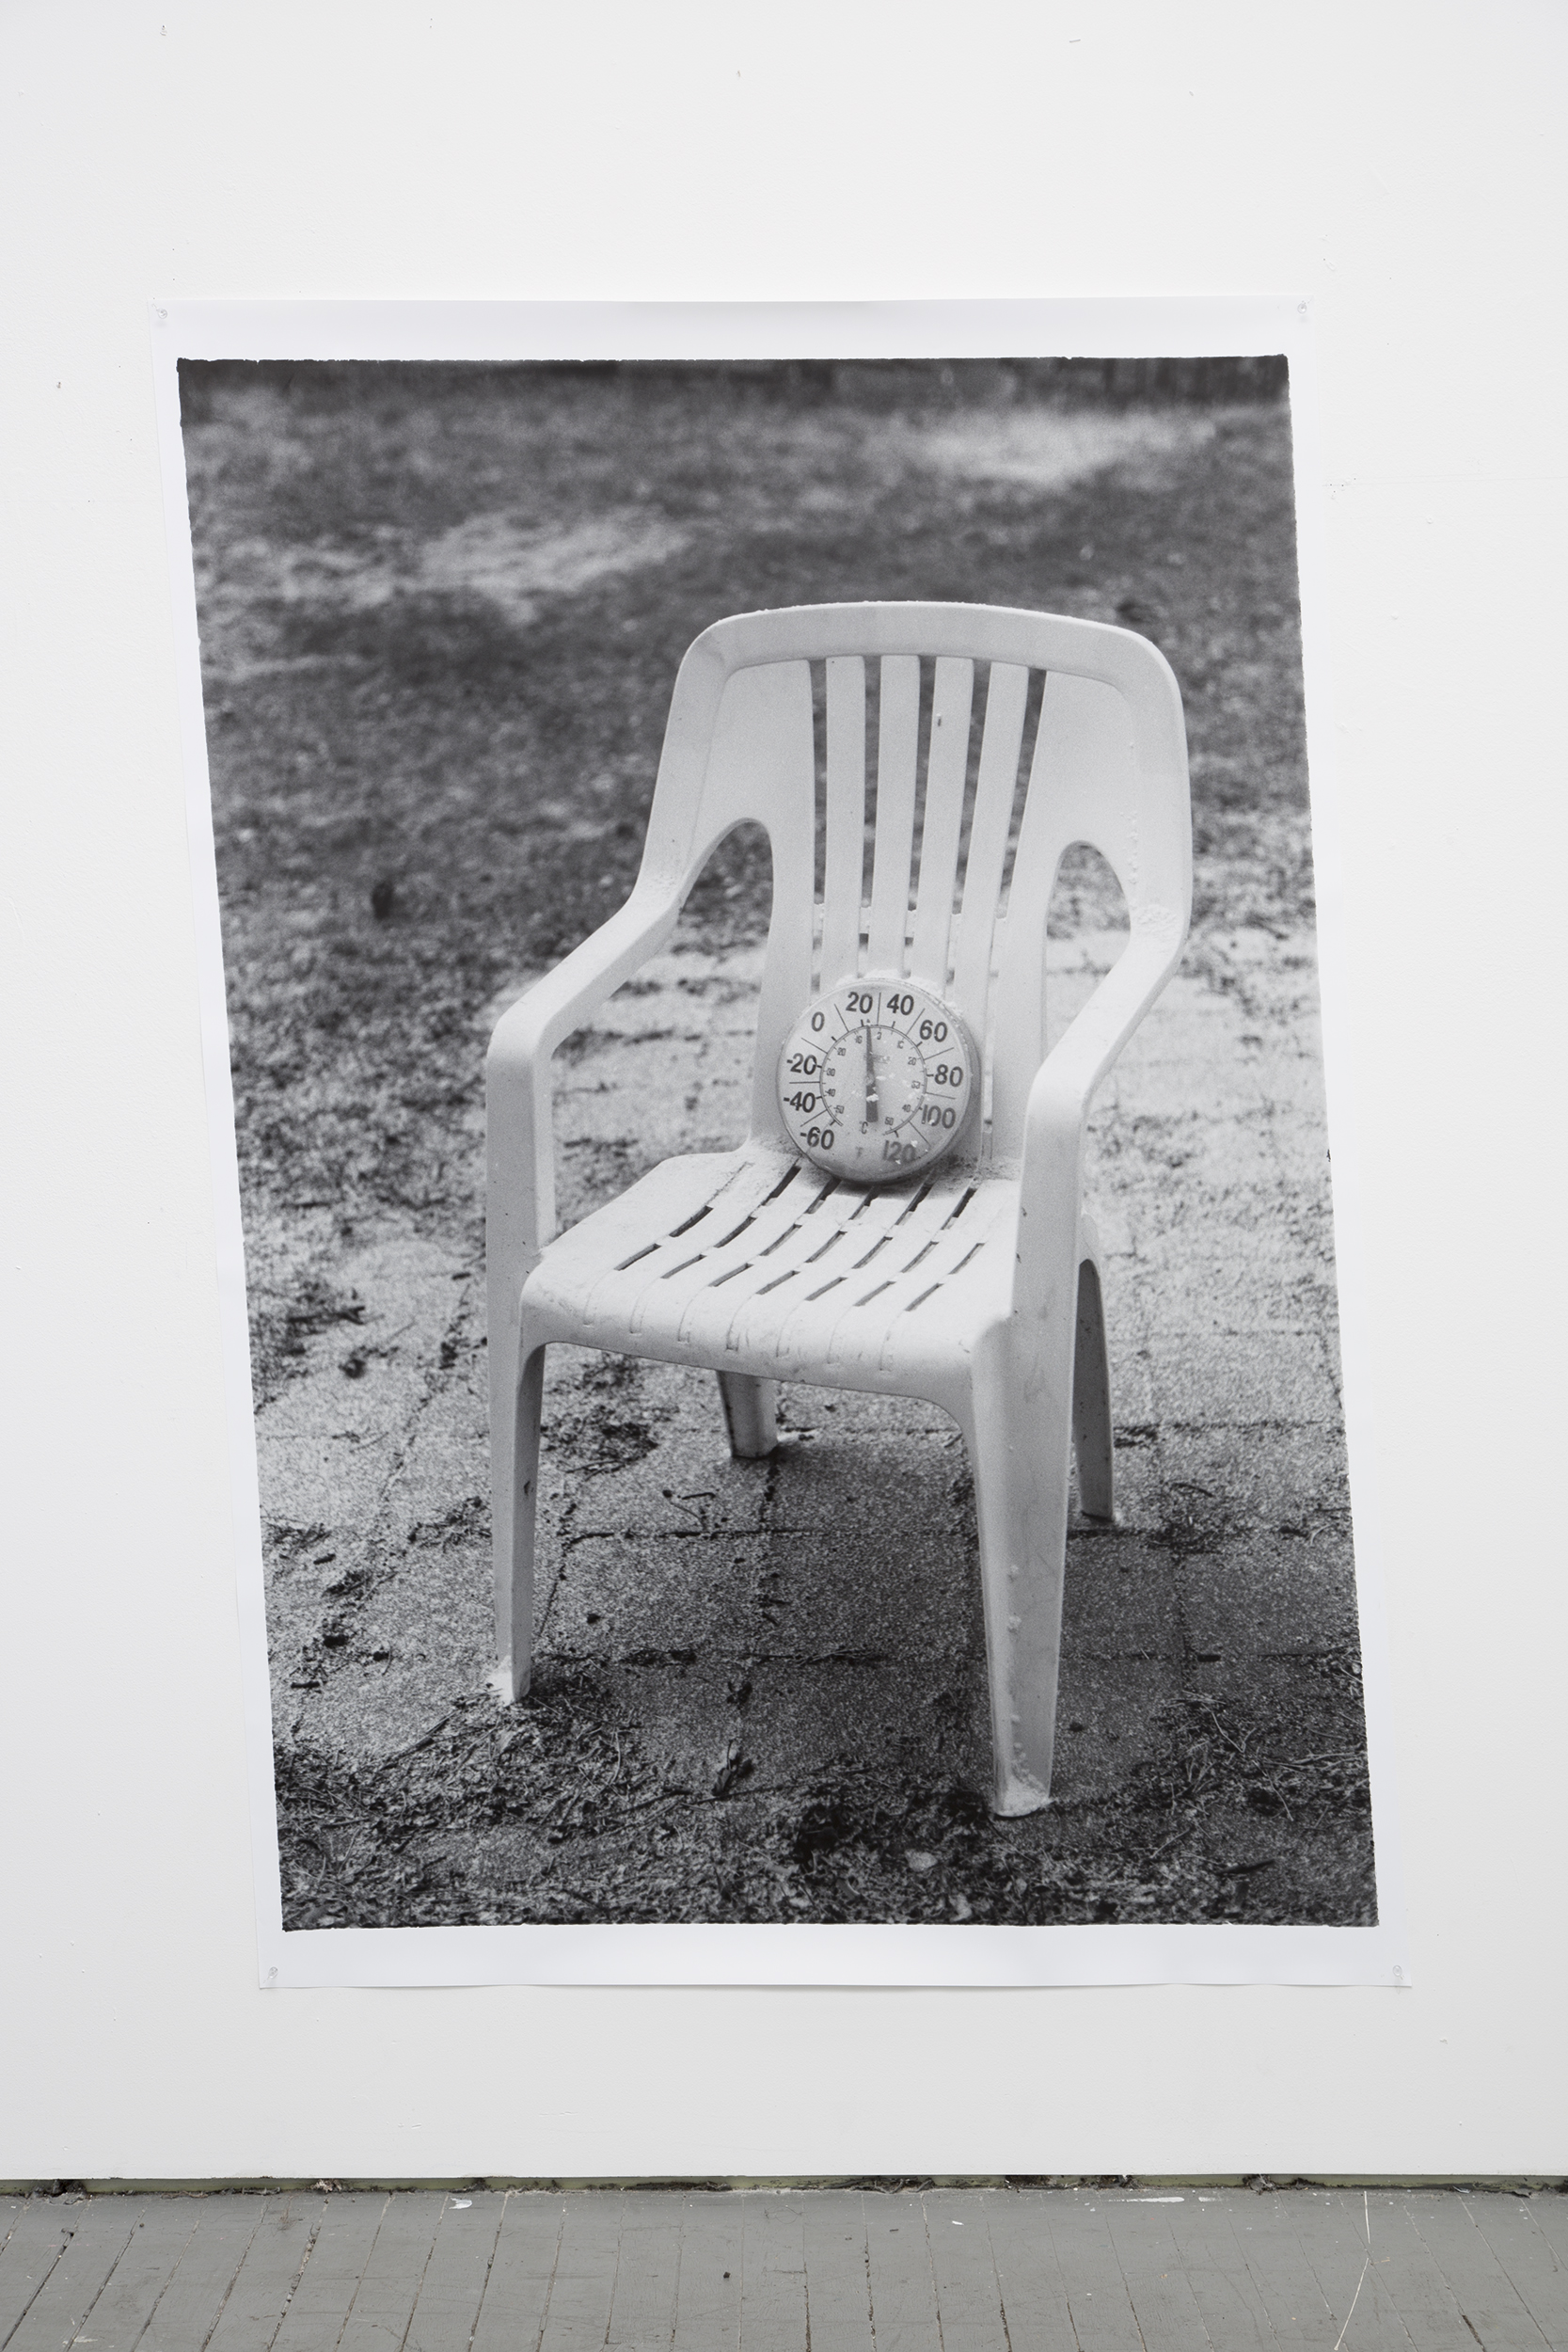 Gregory_Carideo-16_WEATHER_CHAIRS_1_2014_INKJET_PRINT